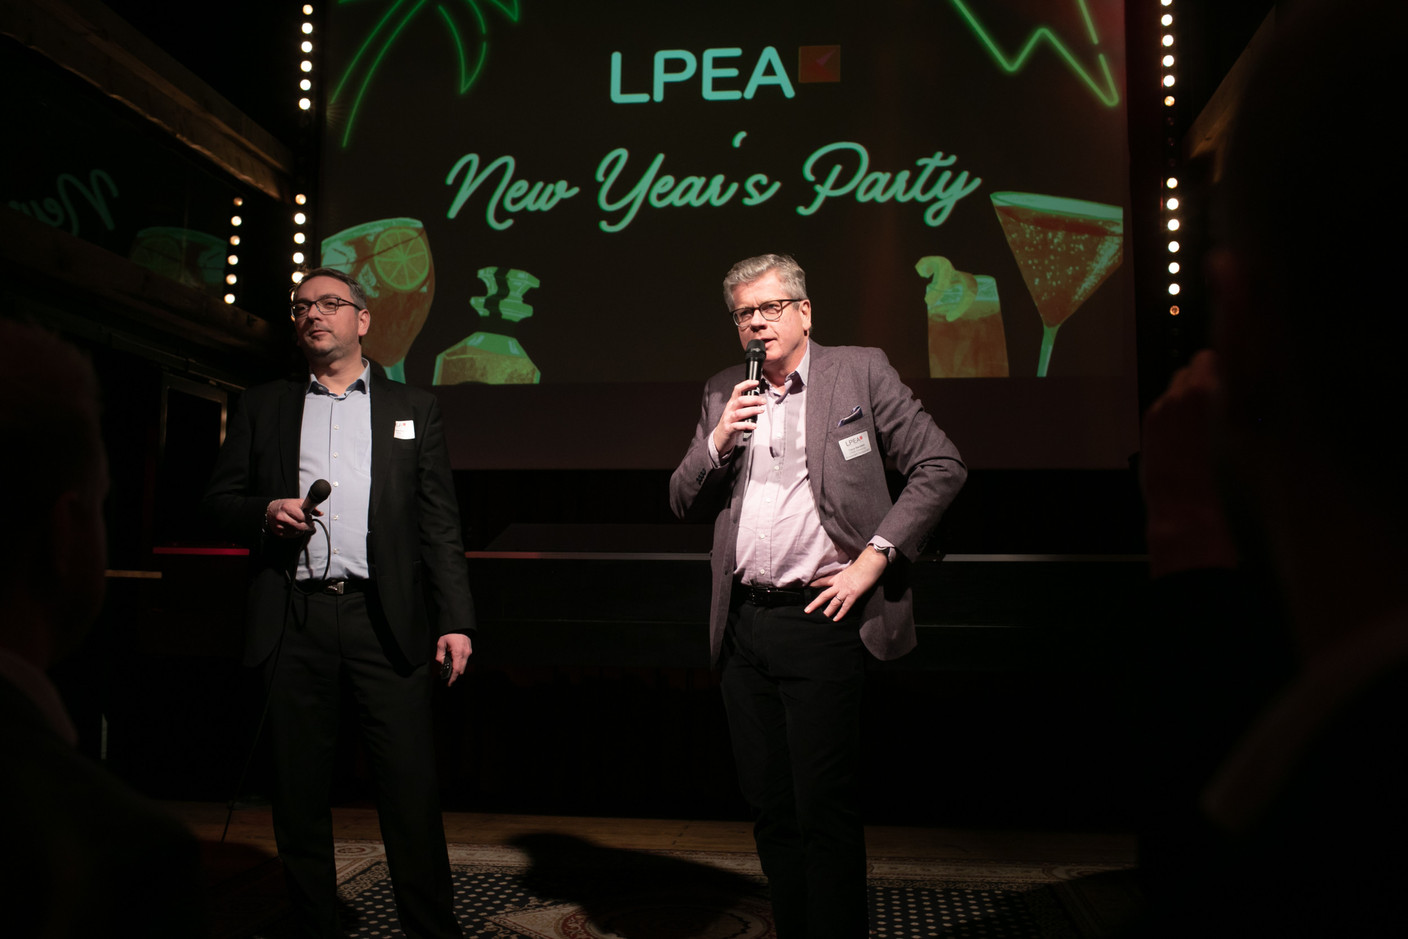 Stéphane Pesch, CEO of LPEA, and Claus Mansfeldt, president of LPEA, speaking at the association's New Year's reception, held at Melusina on 19 January 2023. Matic Zorman / Maison Moderne